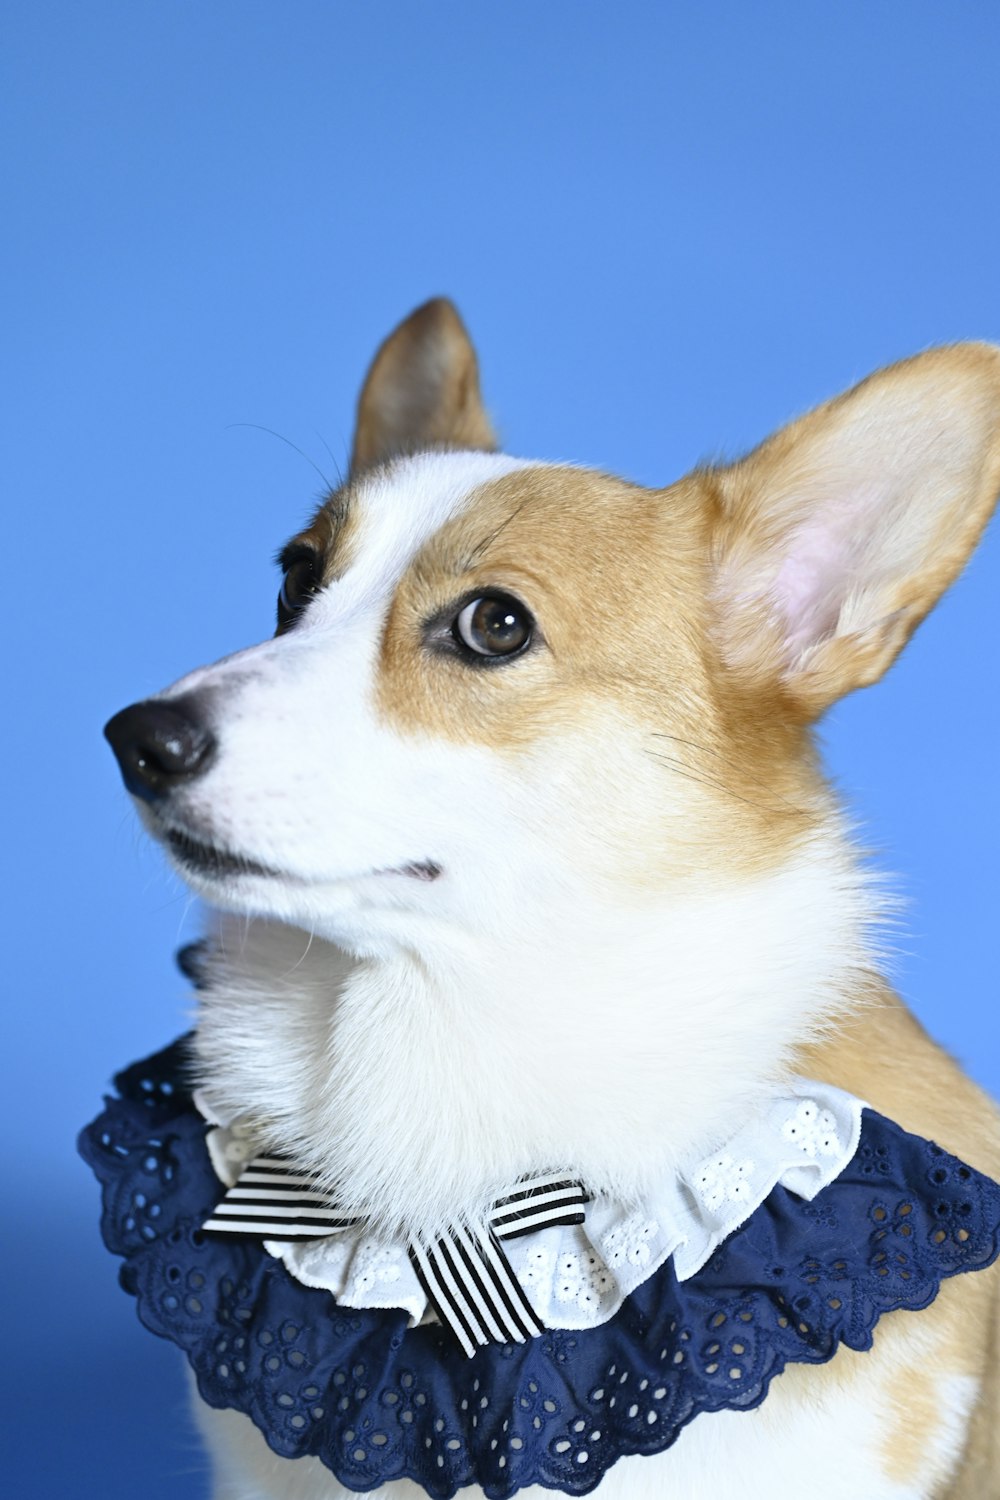 a small dog wearing a collar and a dress